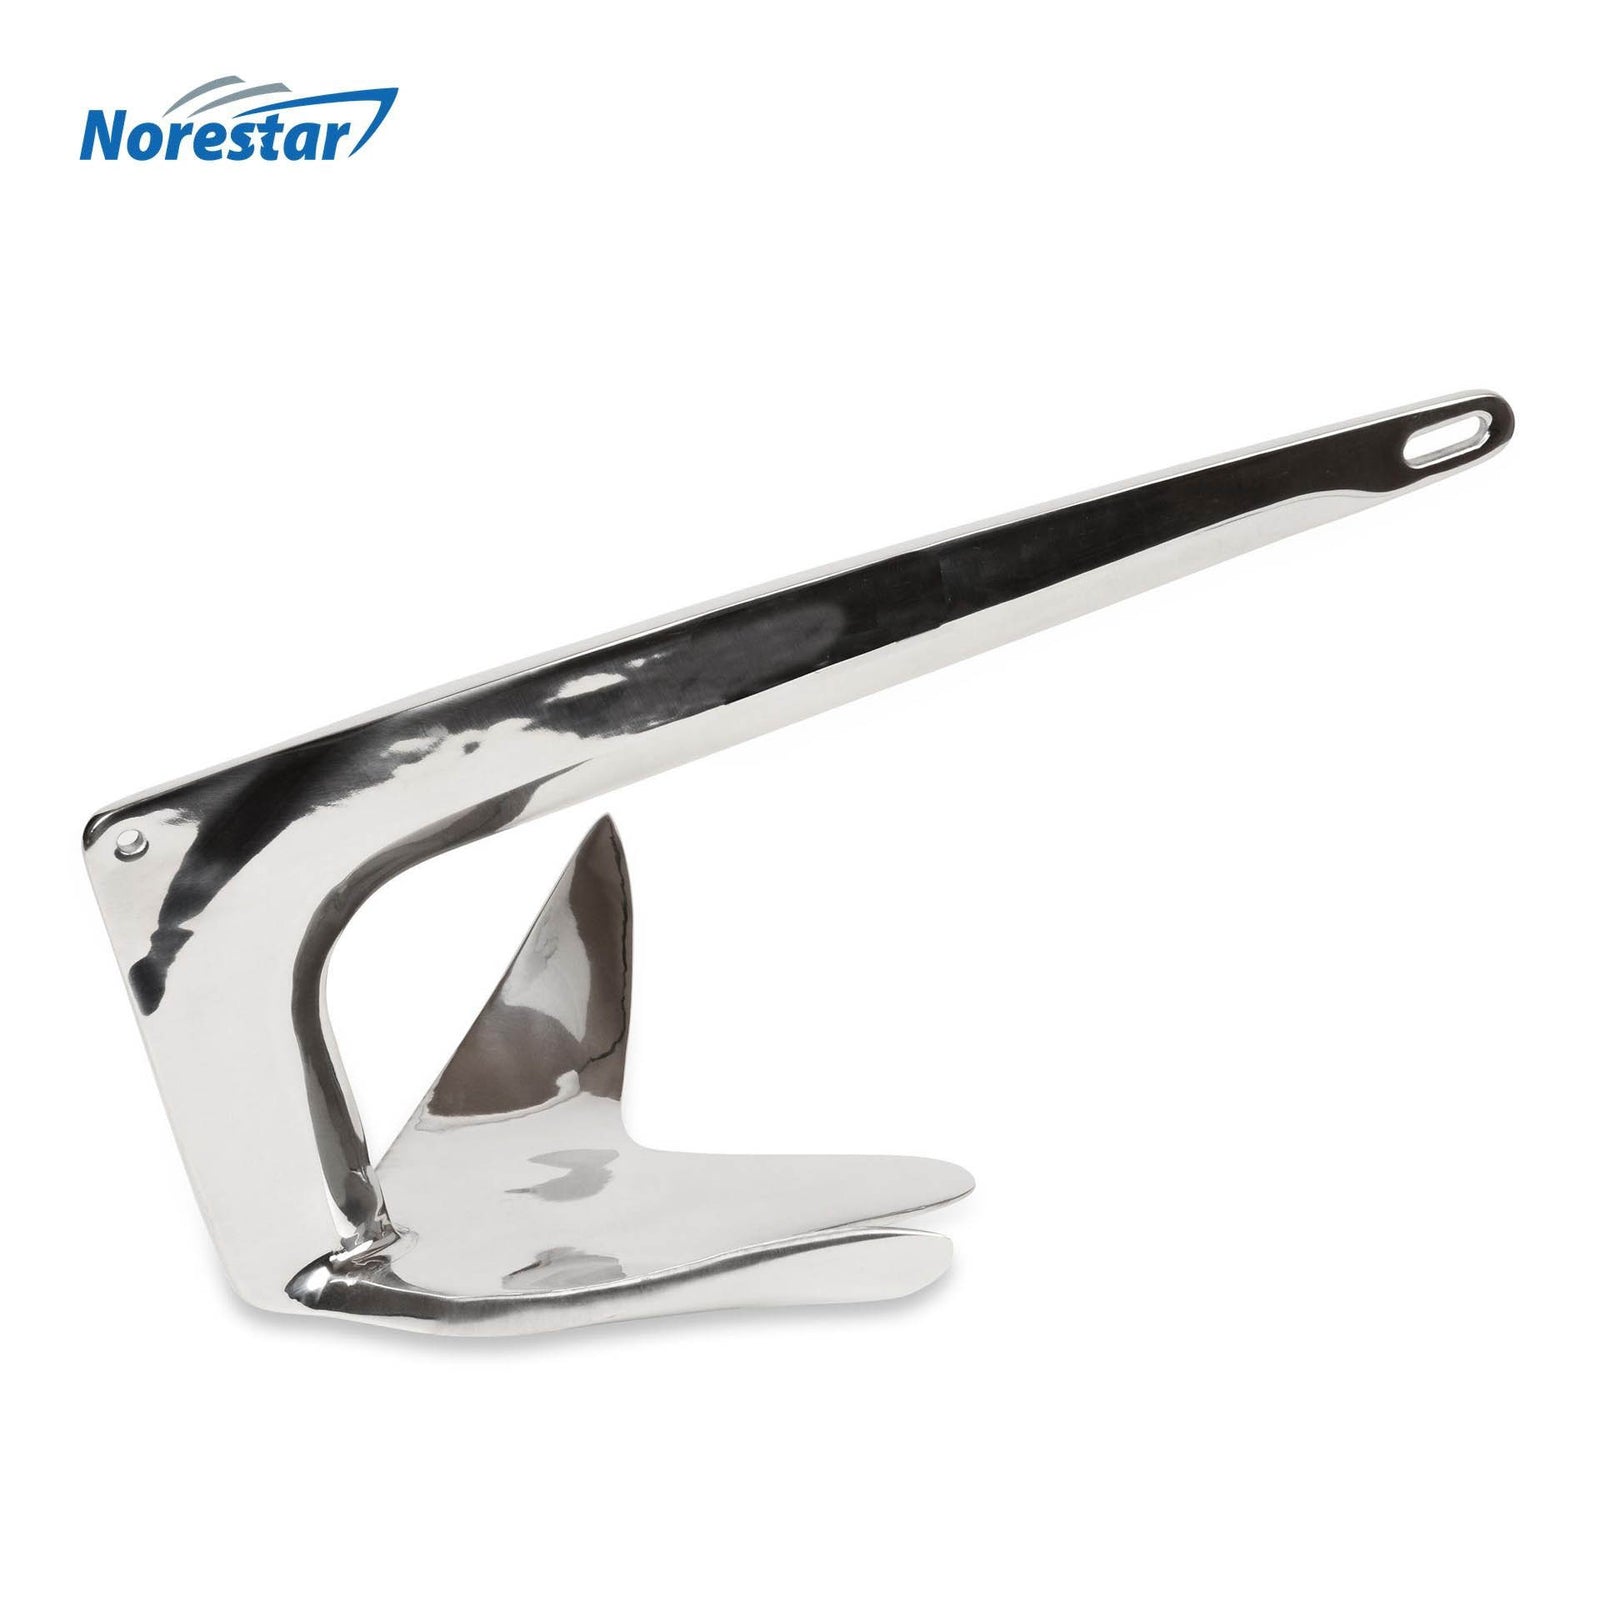 Stainless Steel Bruce/Claw Boat Anchor by Norestar